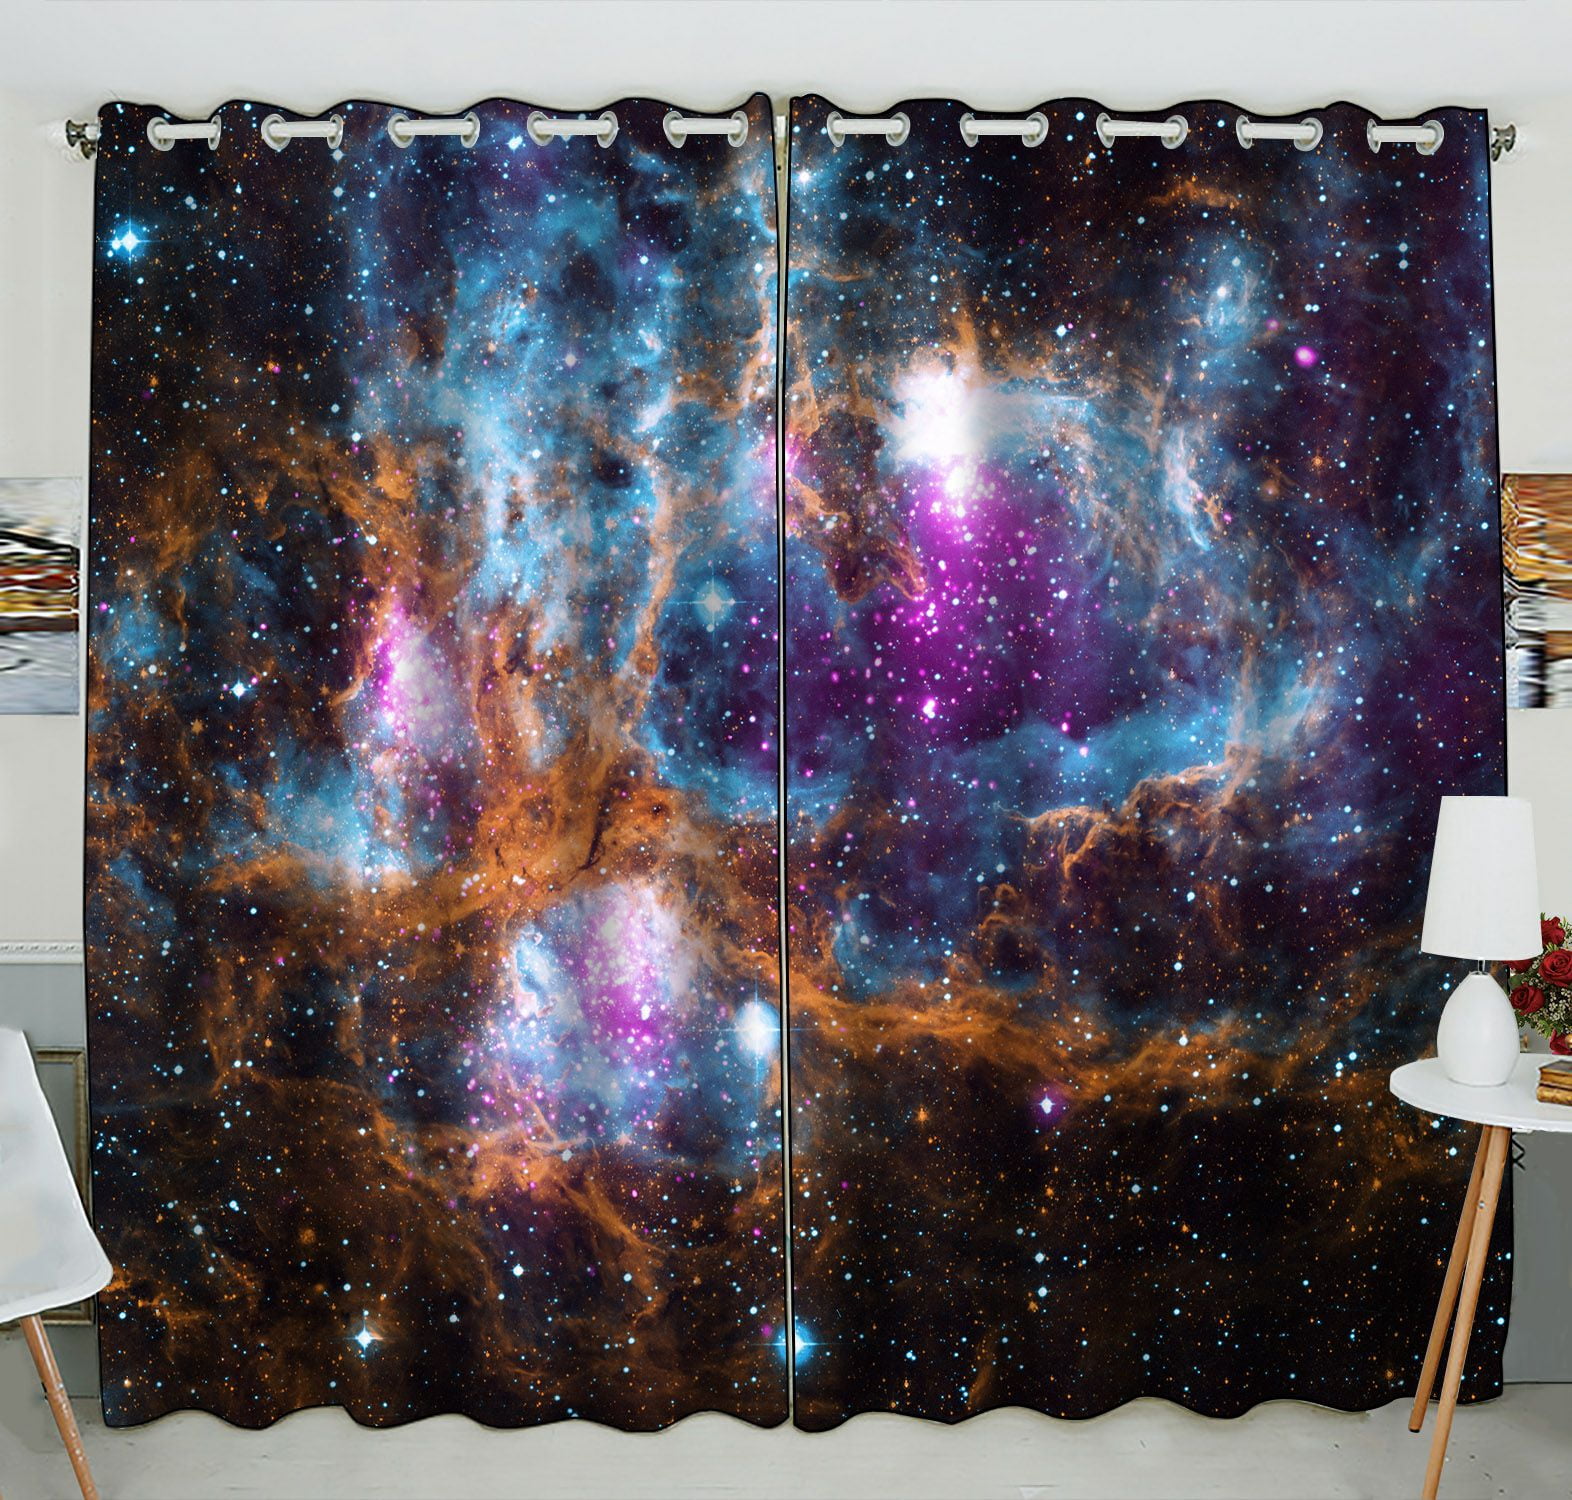 ZKGK Galaxy Space Universe Window Curtain Drapery/Panels/Treatment For ...